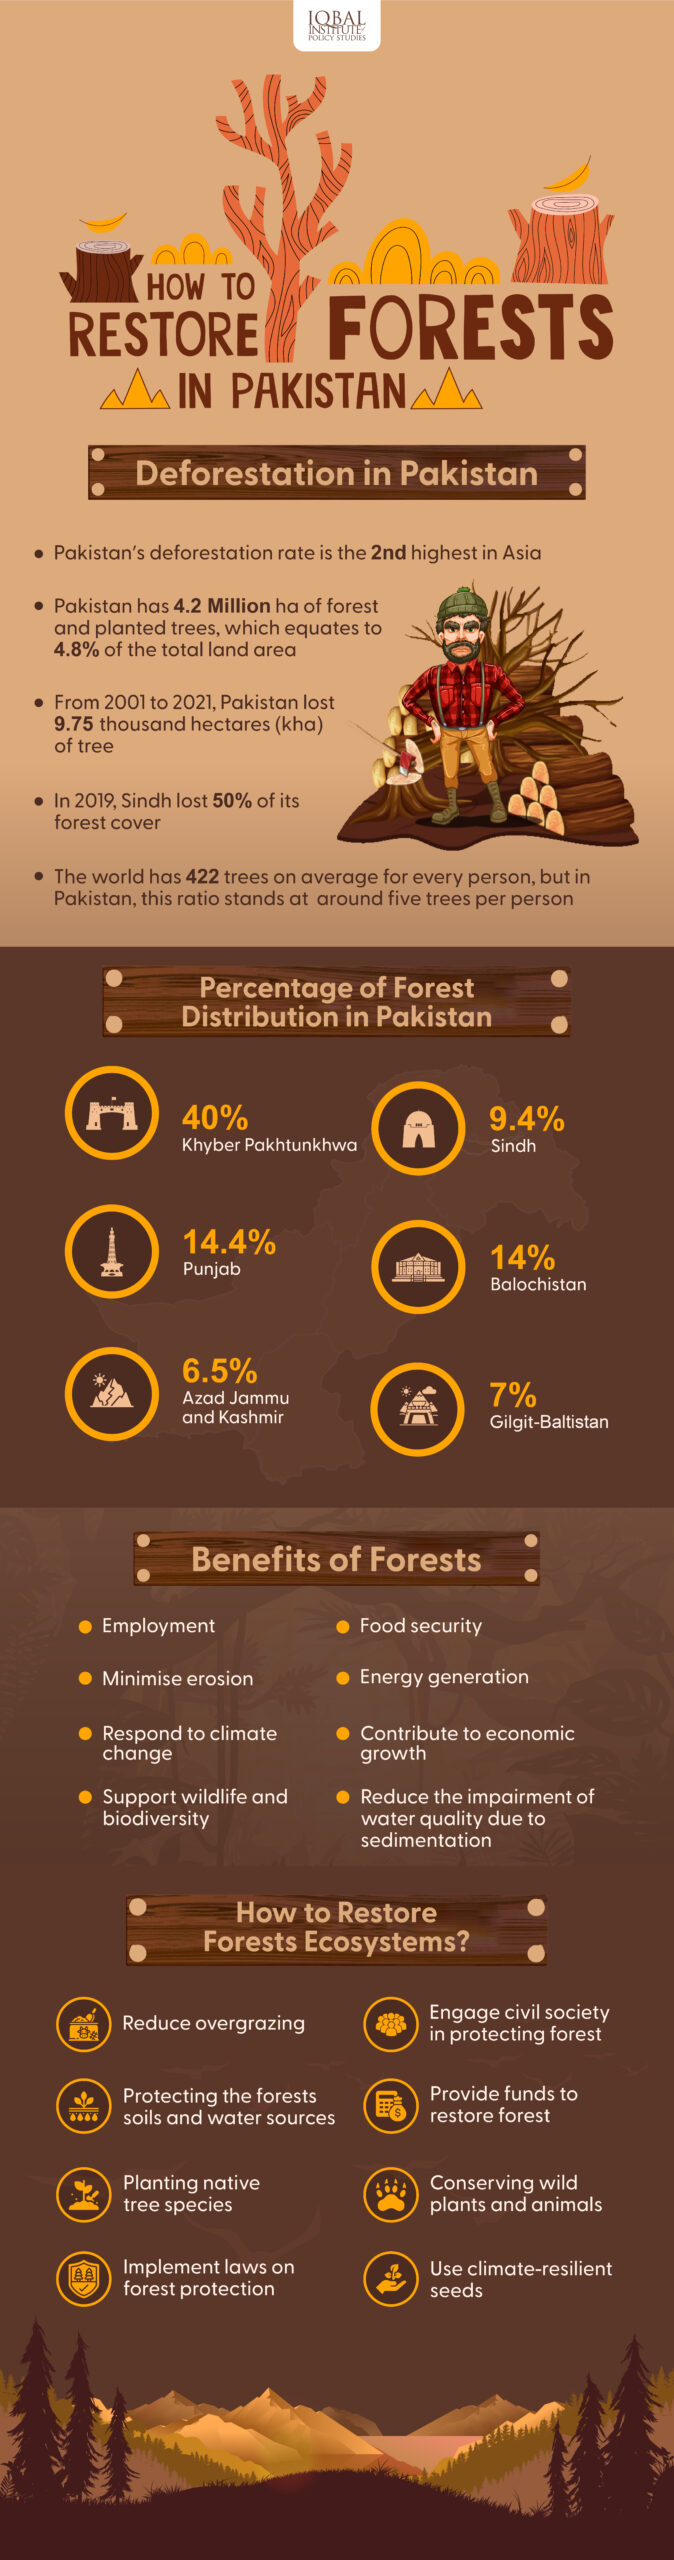 How to Restore Forests in Pakistan